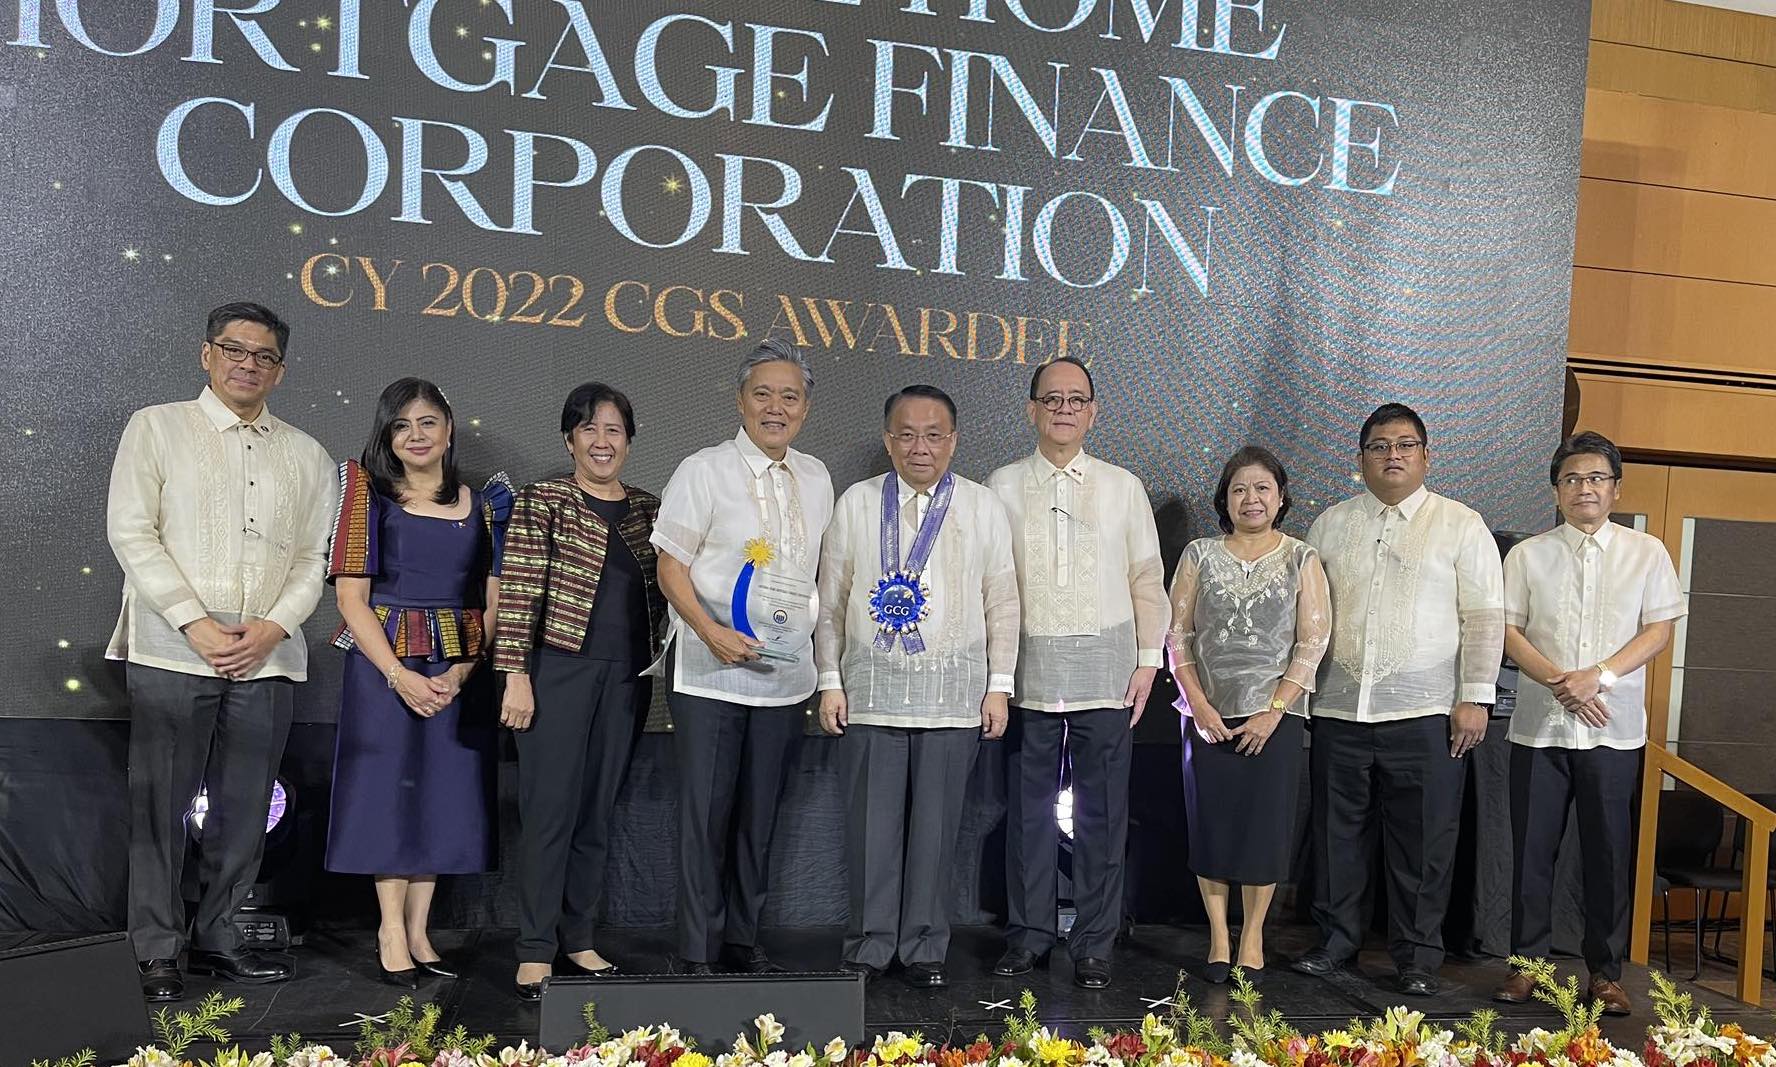 GCG, Executive Secretary hails National Home Mortgage as one of the top-ranking GOCCs in Corporate Governance